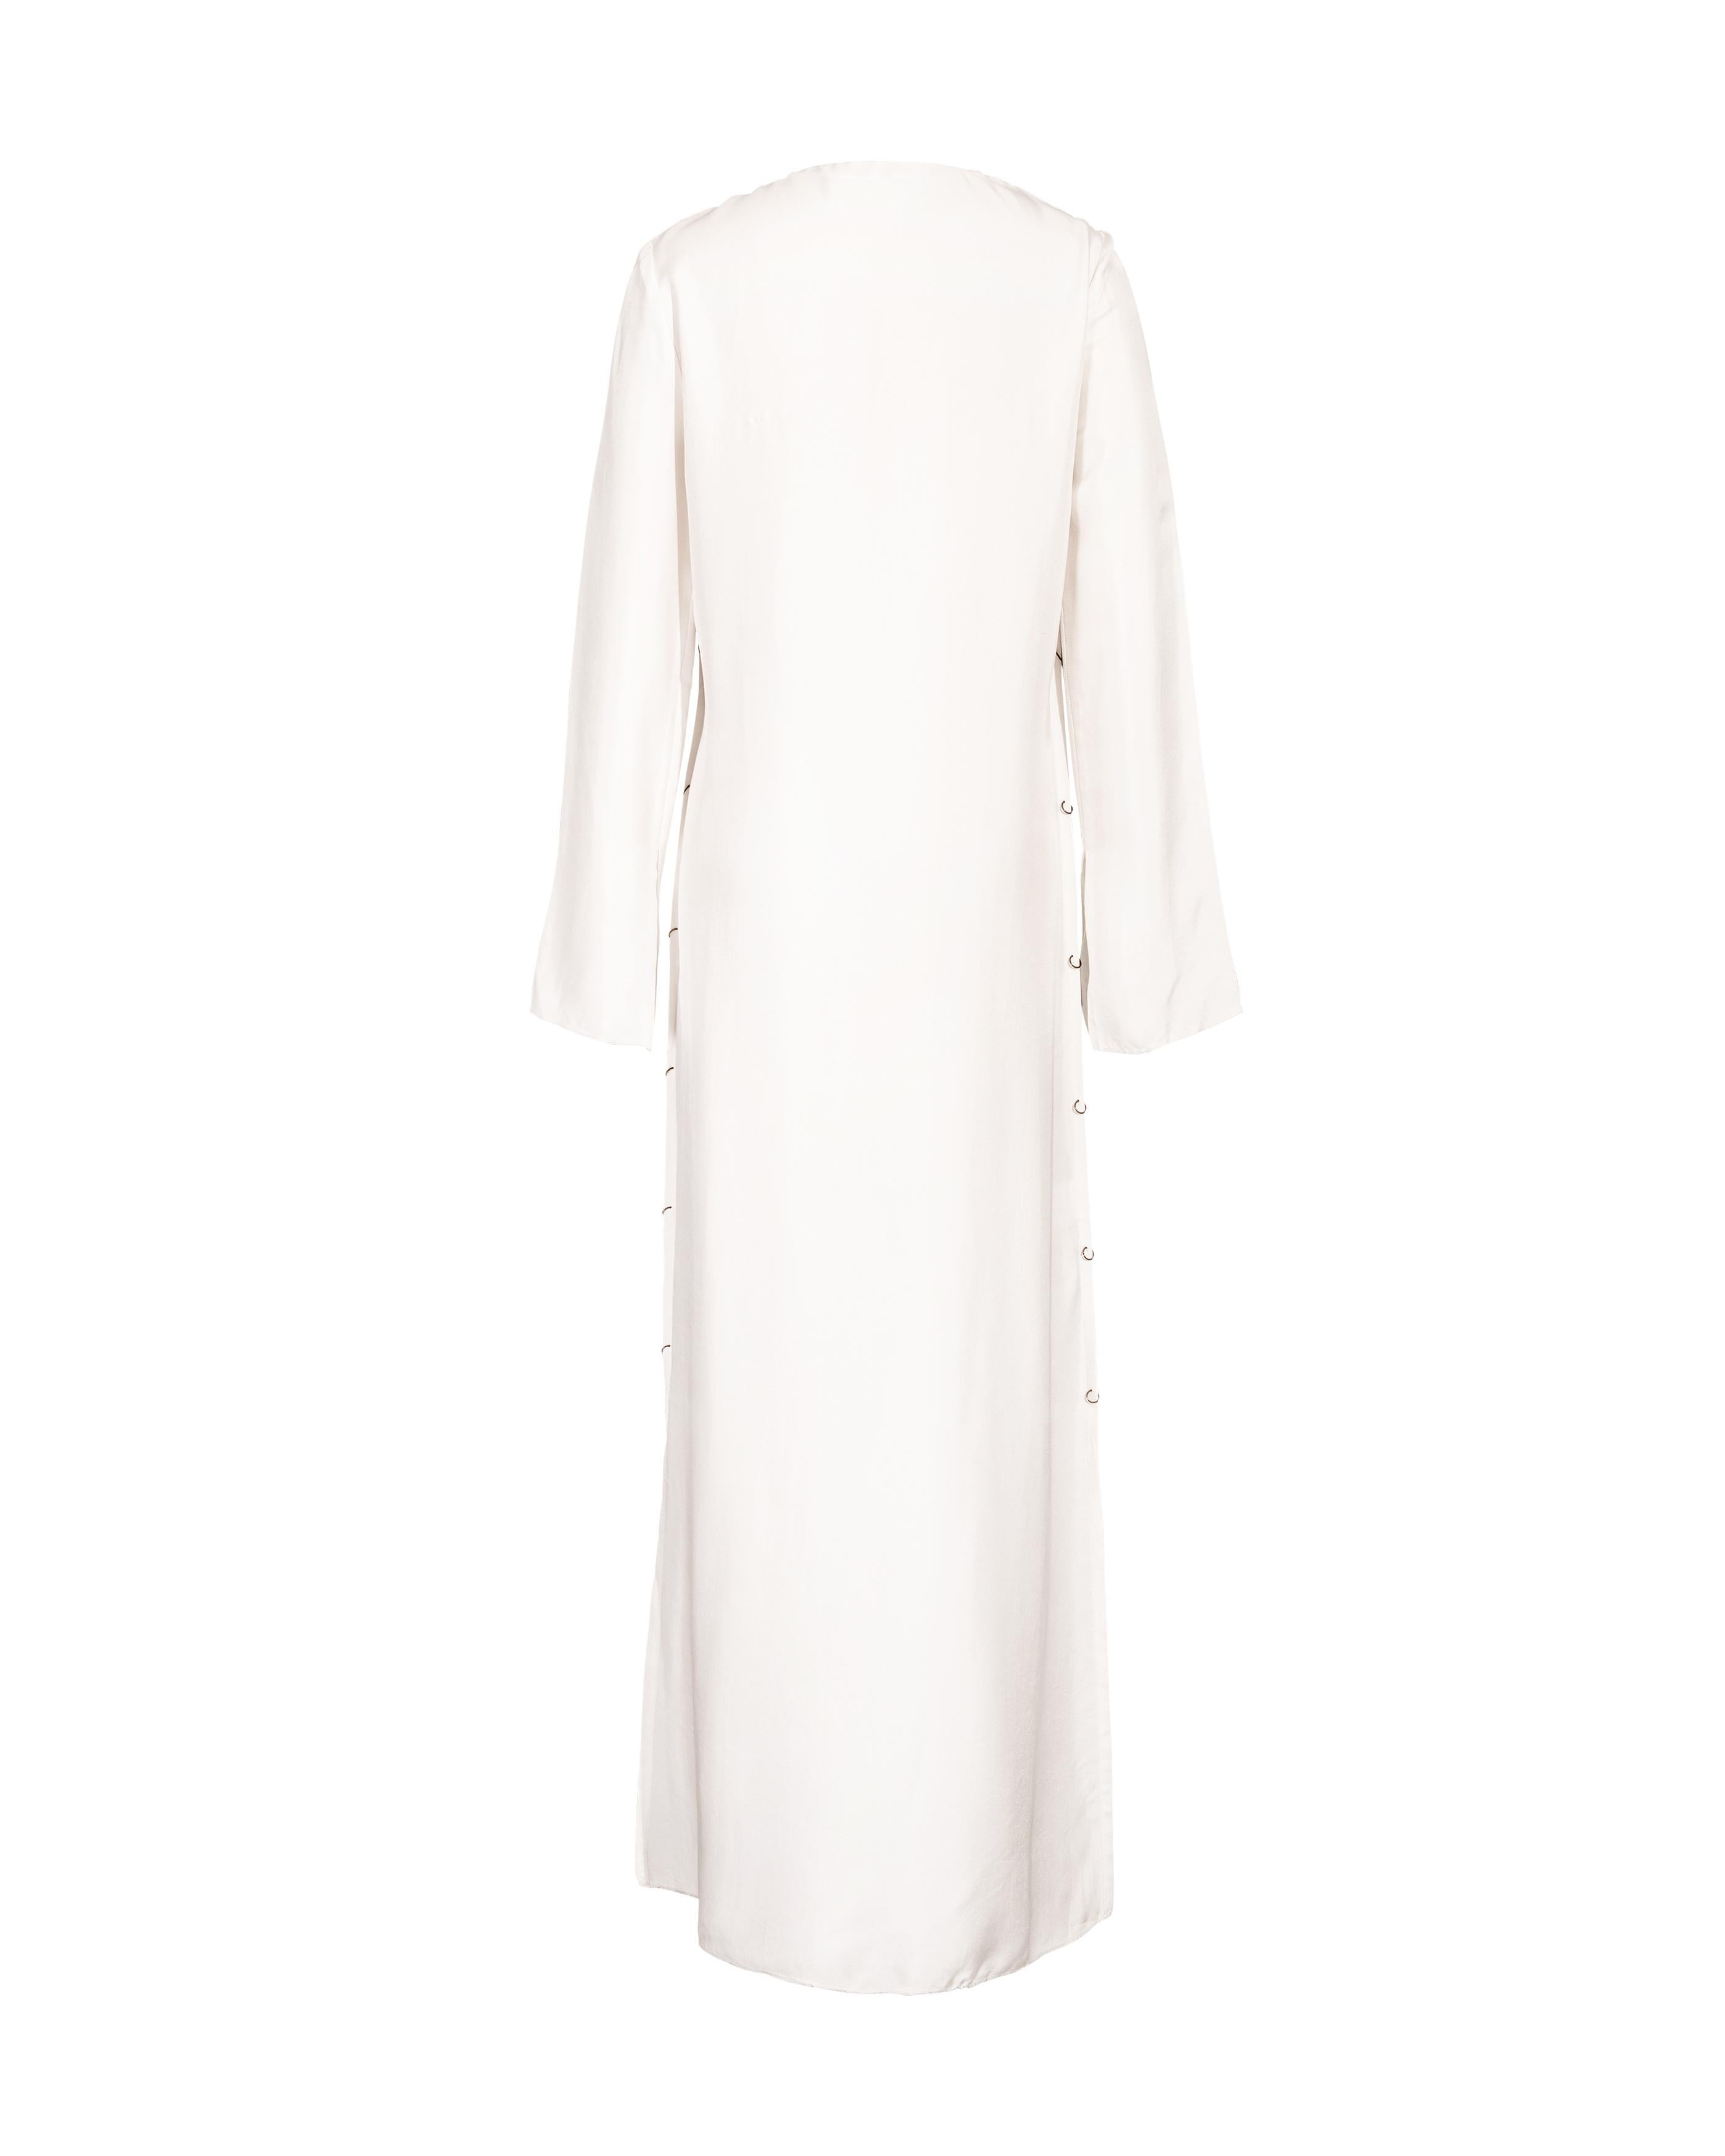 S/S 2016 Calvin Klein White Silk Gown with Bronze Loop Side Details For Sale 1